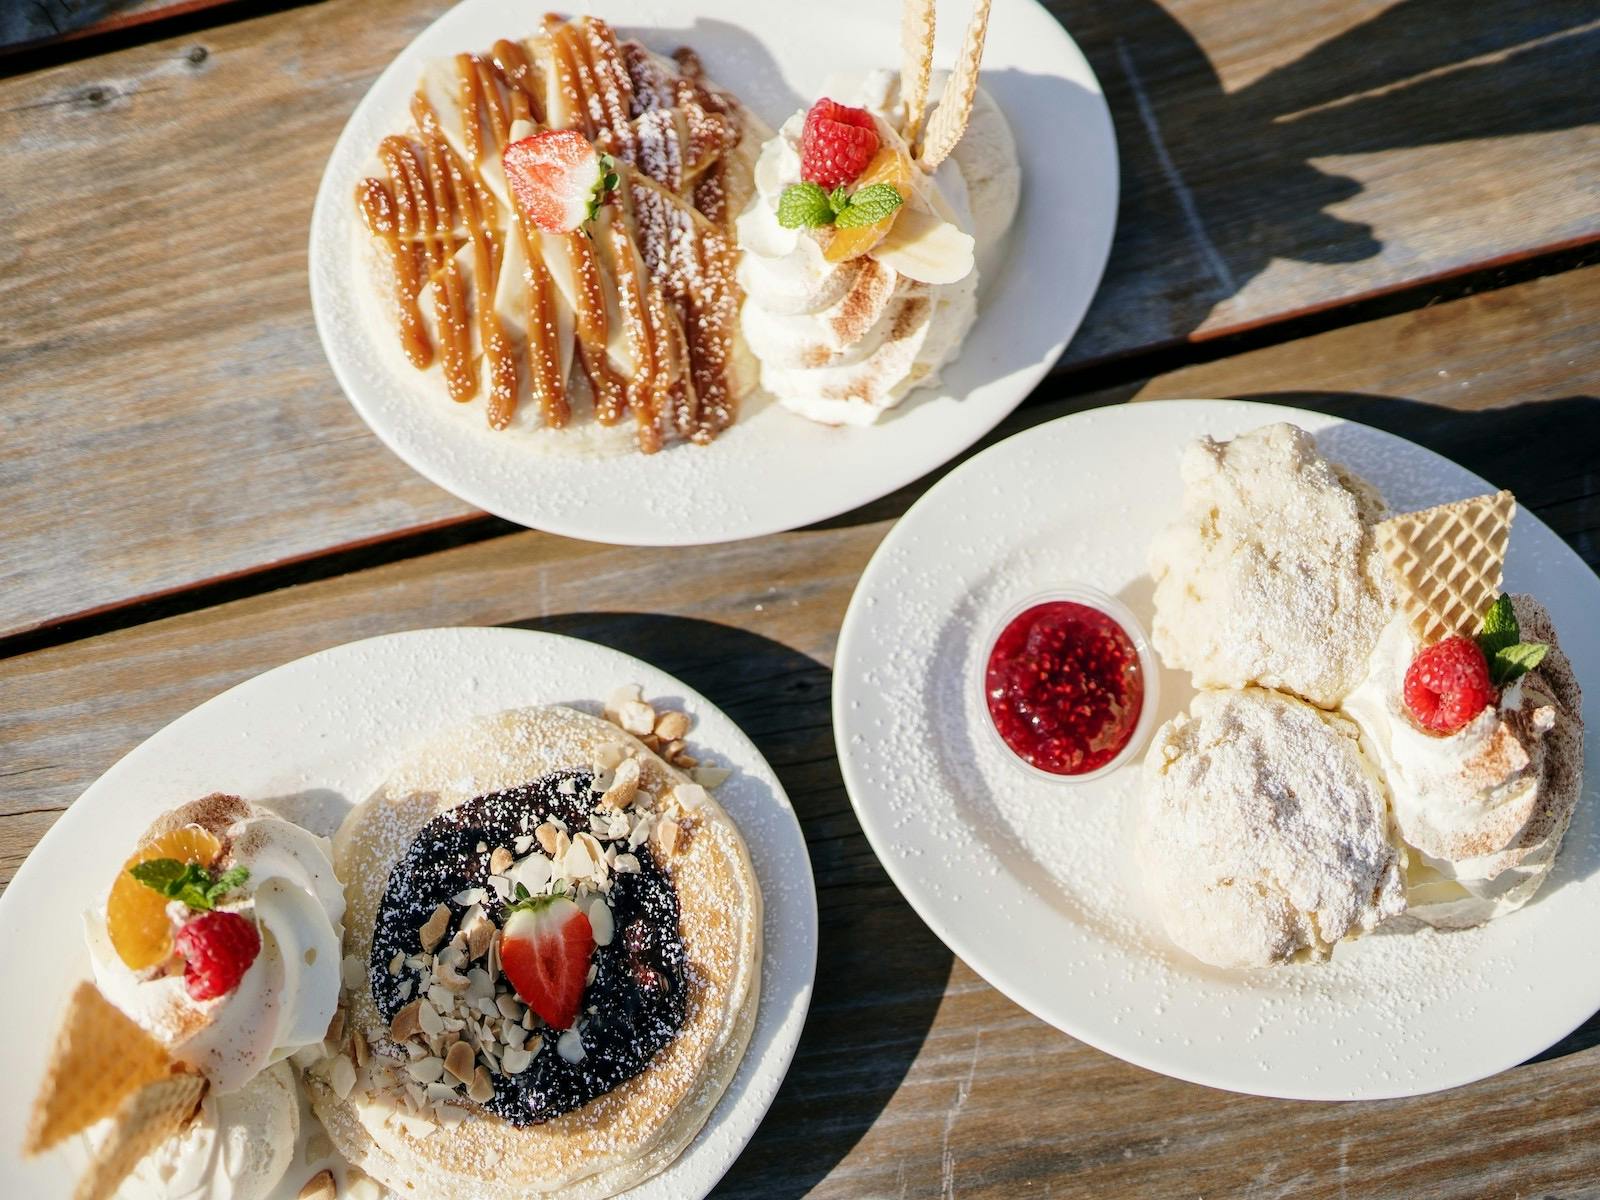 Three plates with various types of pancakes.